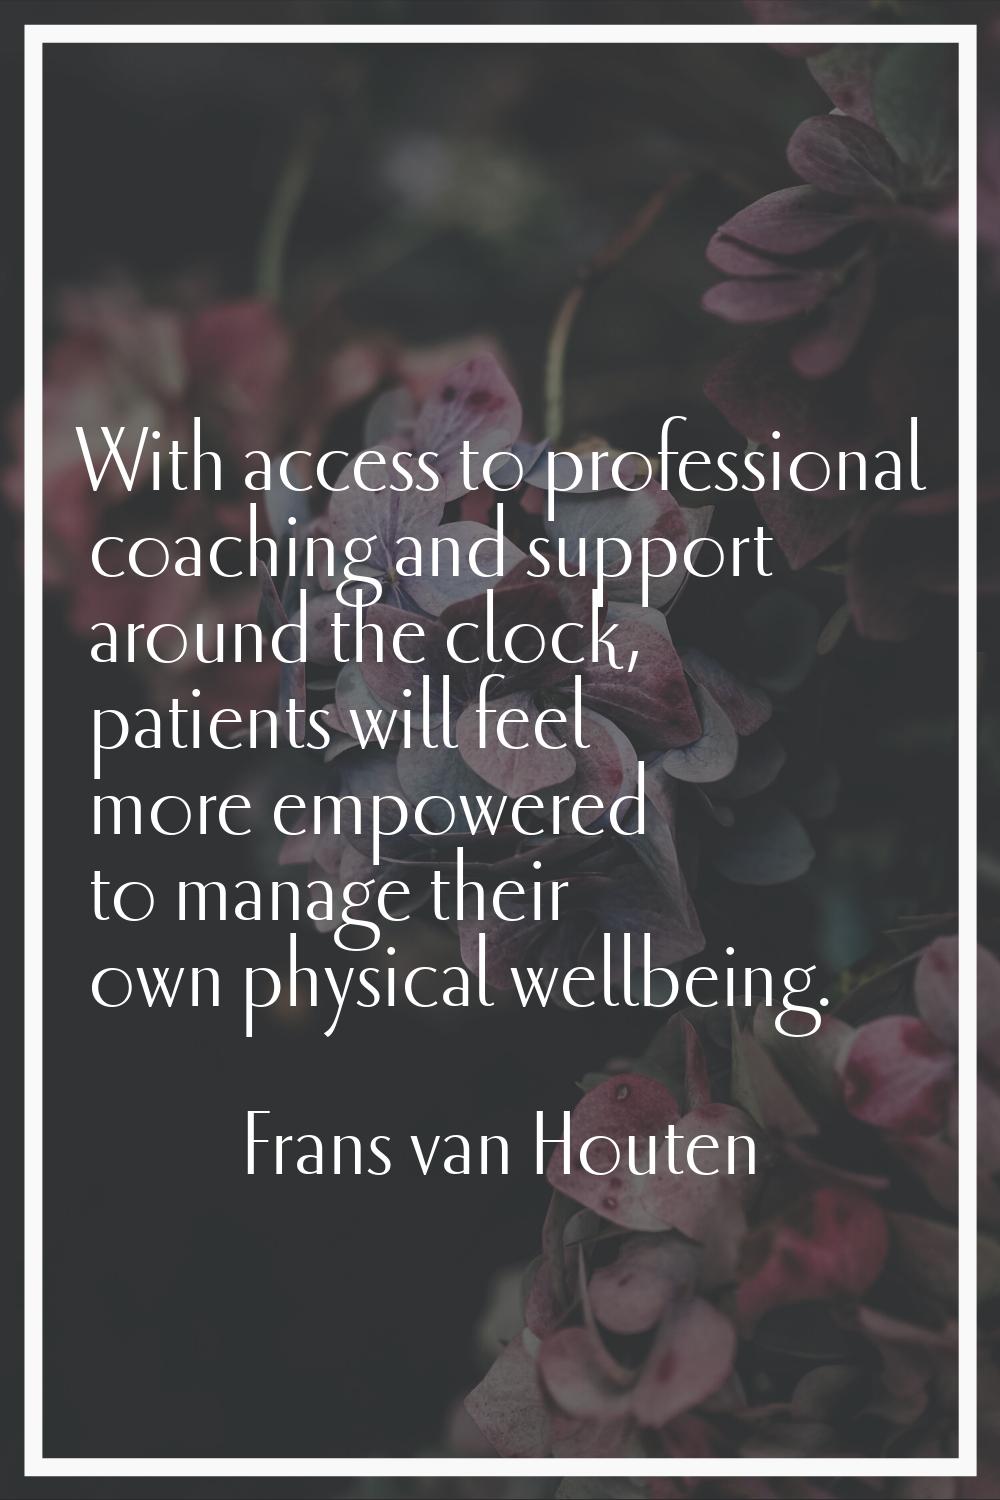 With access to professional coaching and support around the clock, patients will feel more empowere